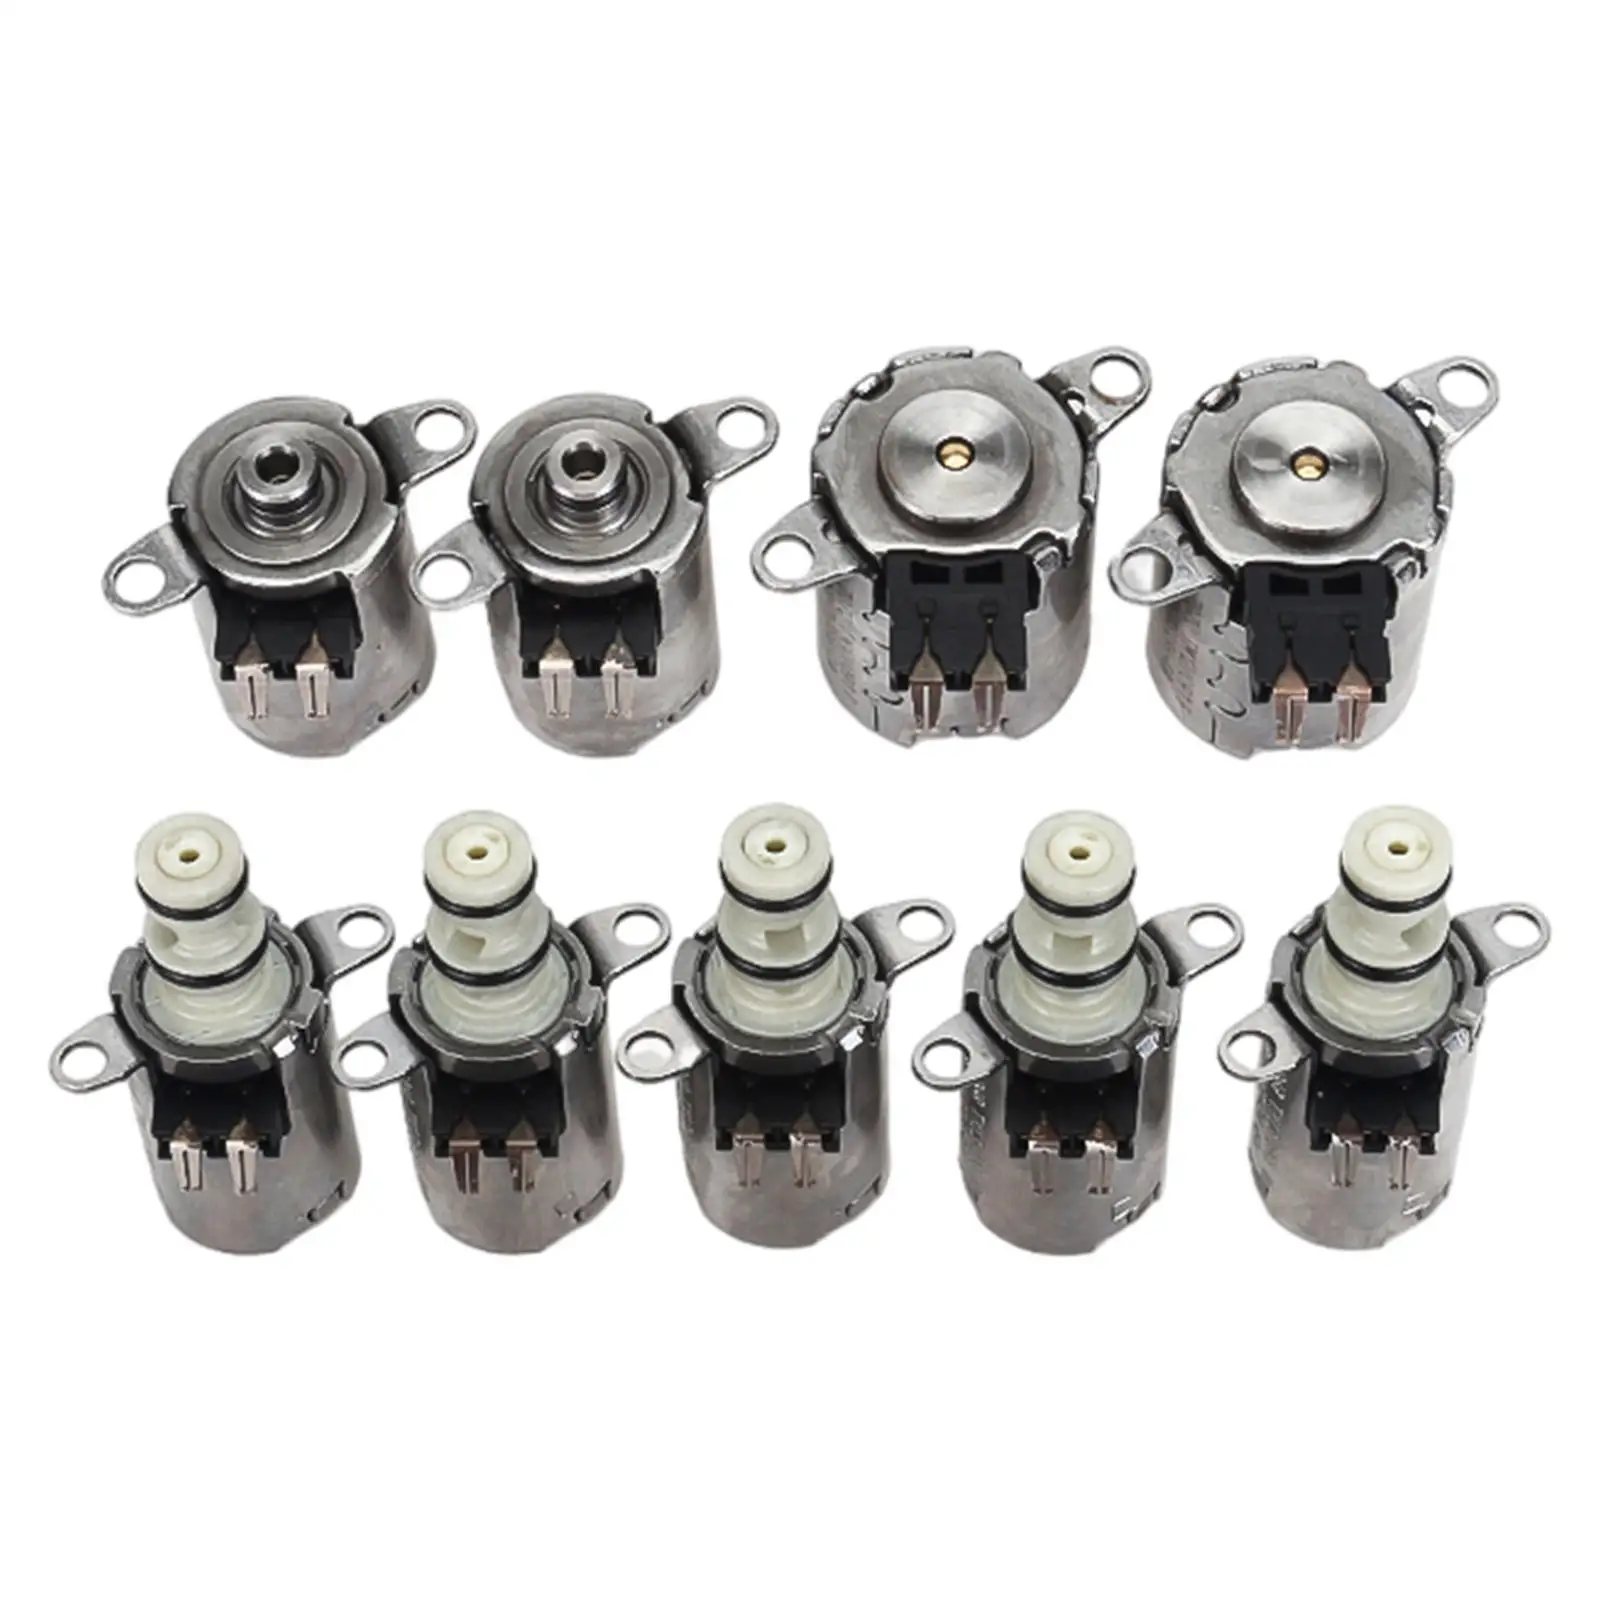 9-Pack Vehicle Transmission Solenoids Kit Replacement Accessories for Focus 6-Speed W-D Clutch Automatic Transmission MPS6